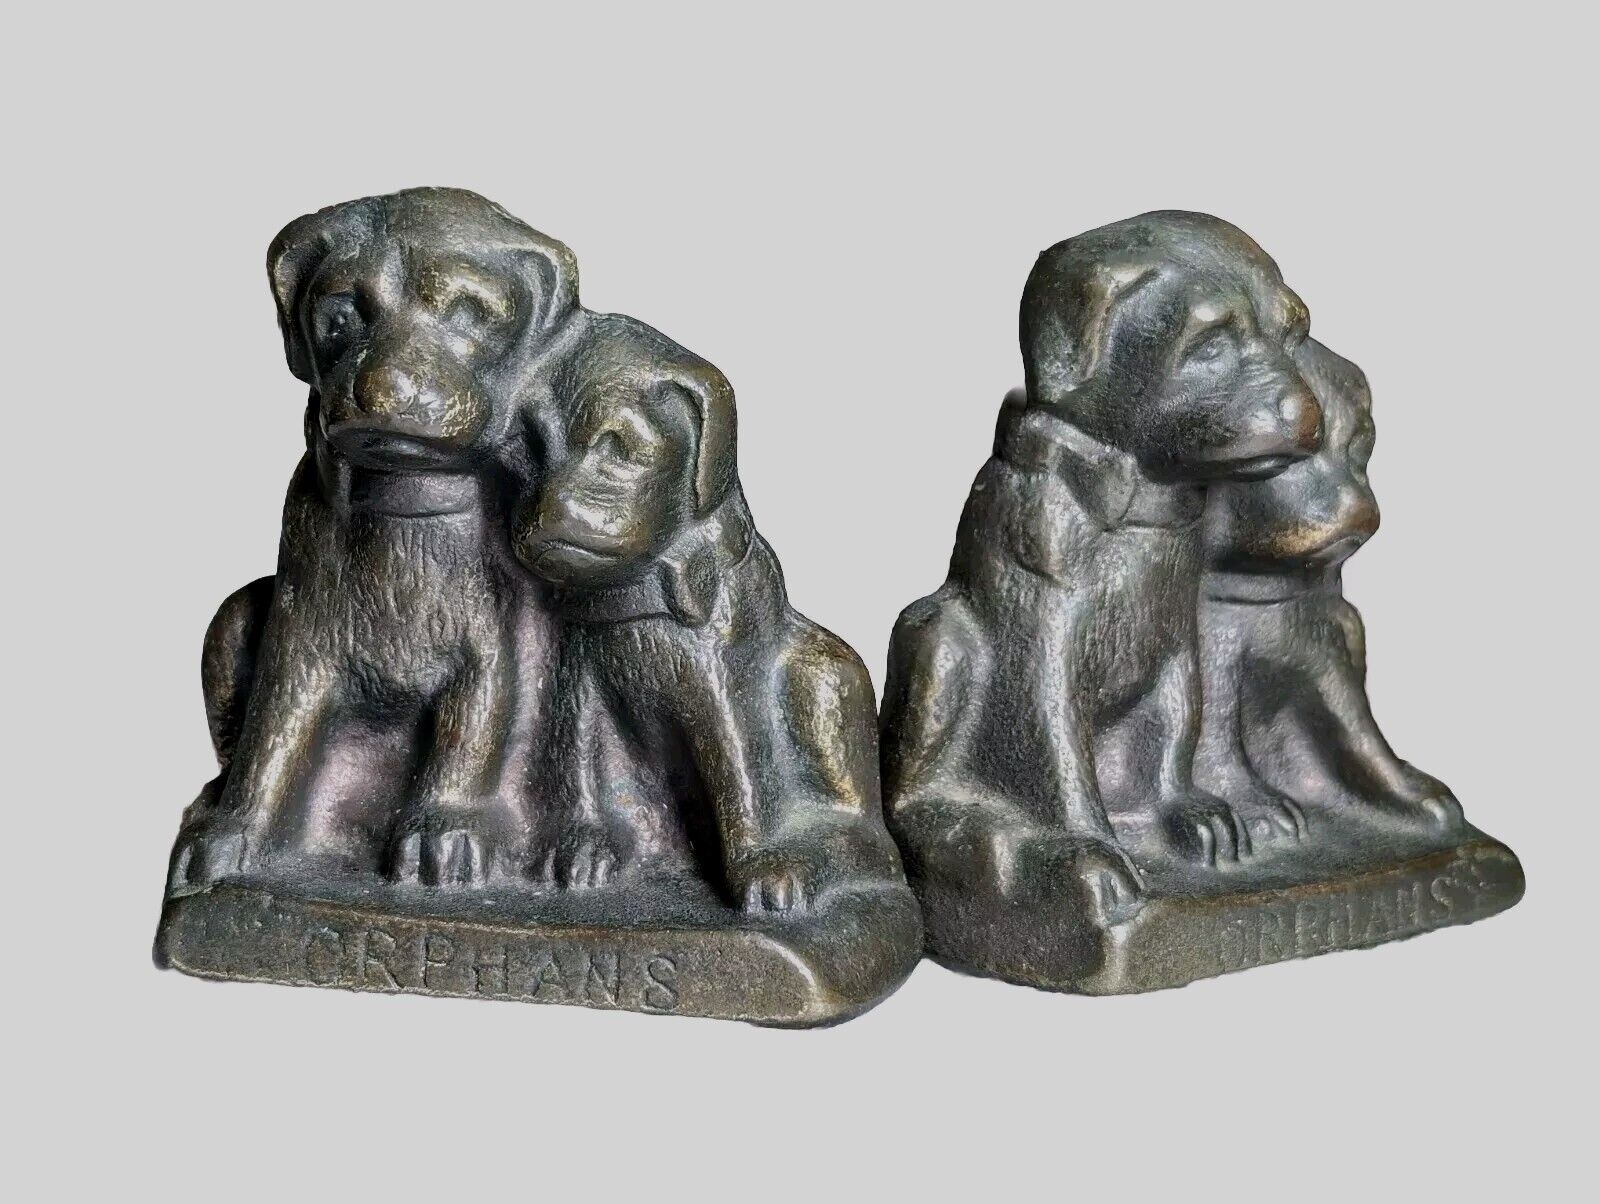 ANTIQUE 1920's SOLID CAST IRON HUBLEY ORPHANS PUPPY DOG DOORSTOPS From Wurzburgs